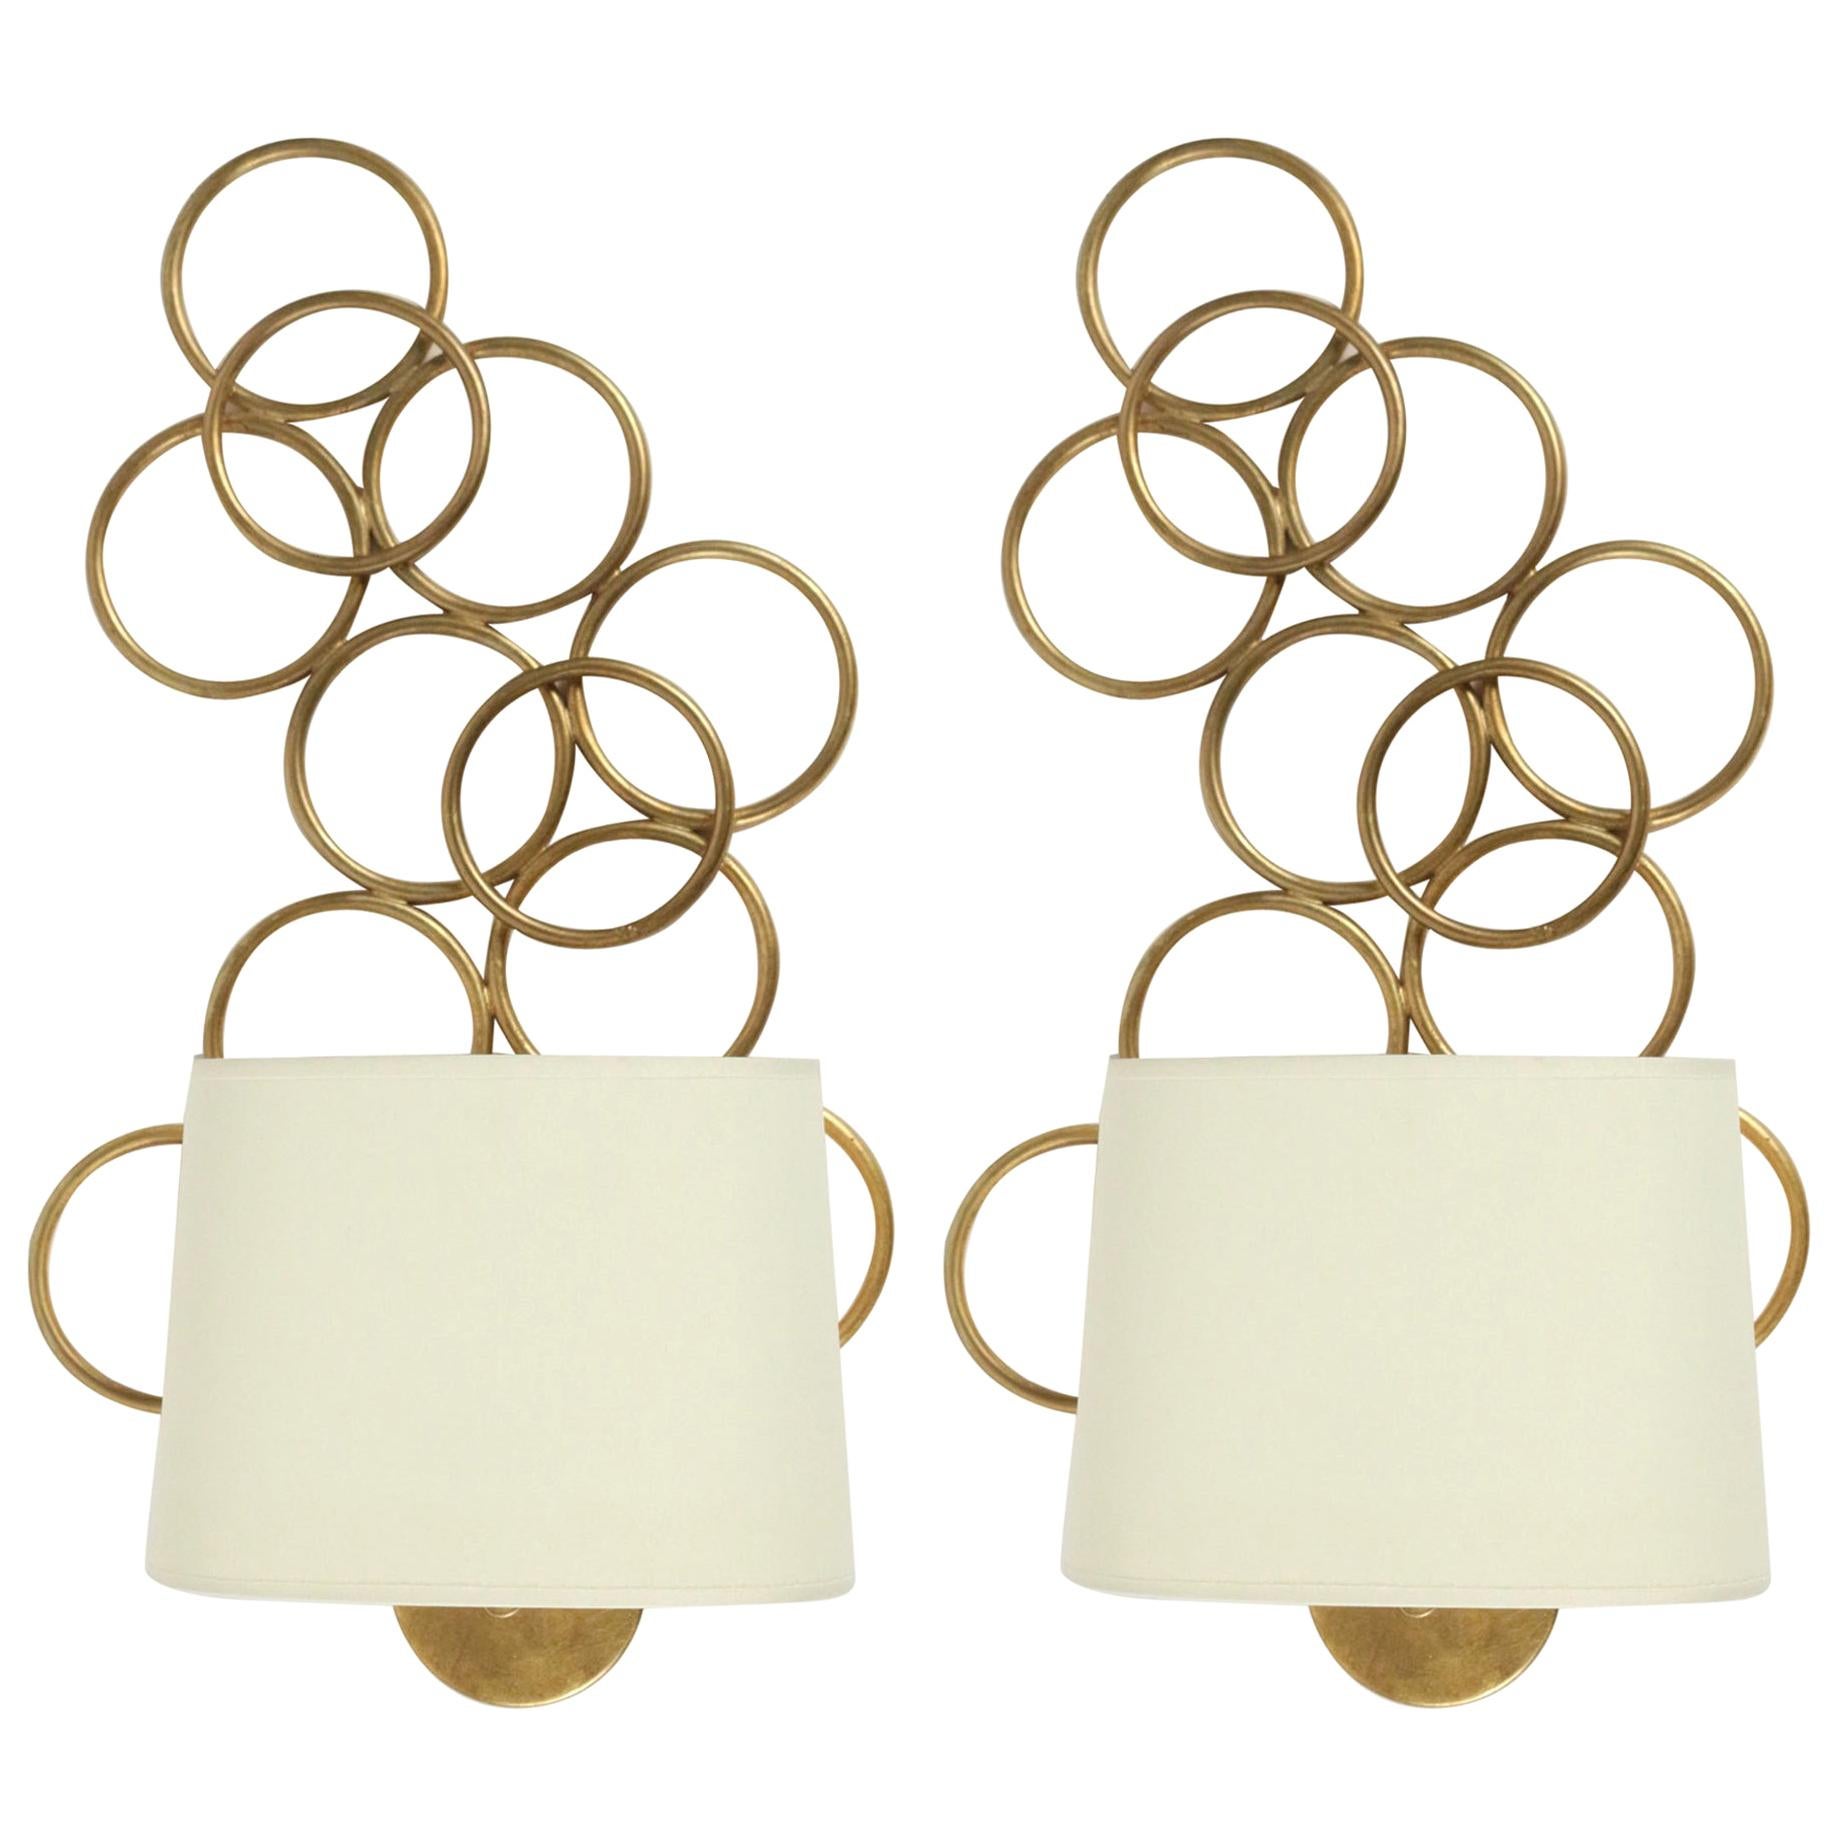 1970s pair of Maison Honore sconces.

Made of intertwined circles, made of gilded metal.
Oval lampshade made of off-white cotton.

One bulb per sconce.